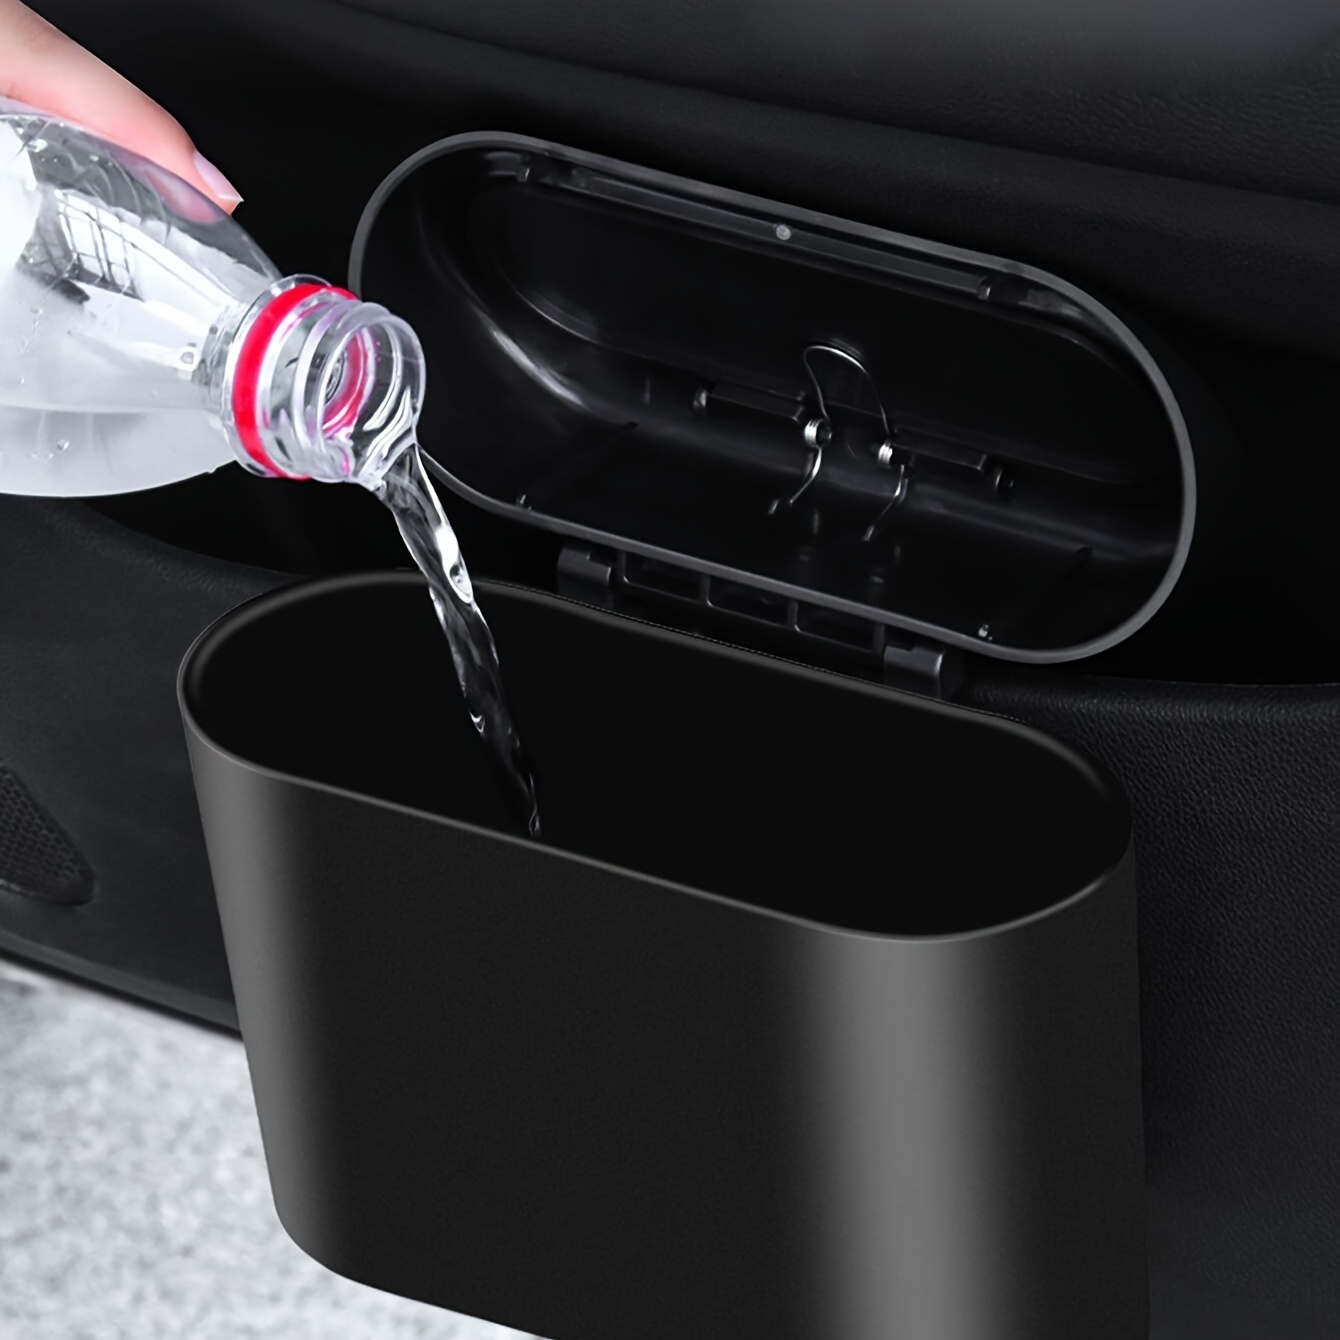 

1pc Multipurpose Car Trash Can - Mini Storage Box For Garage, Office, Kitchen, Bedroom, And Home - Convenient And Stylish Car Organizer, Storage & Organization, Cleaning Supplies